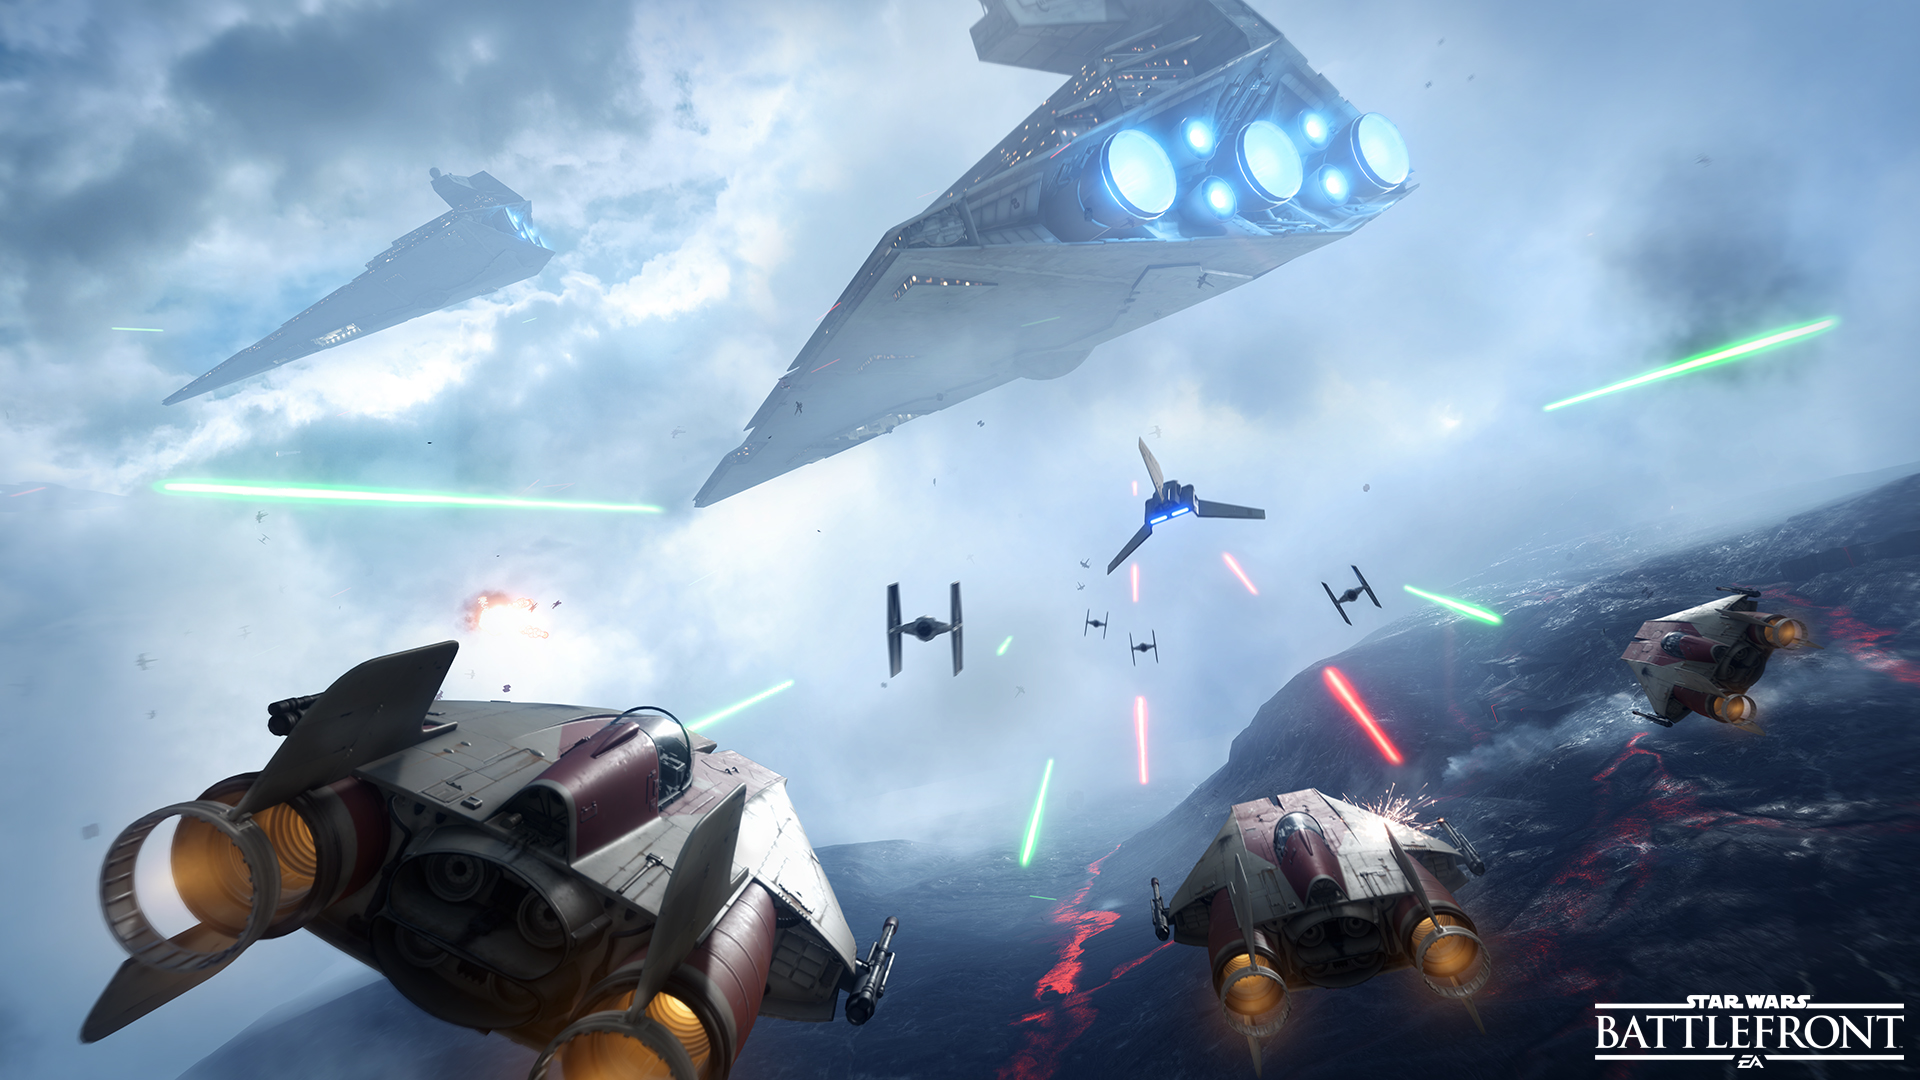 Free download Star Wars Battlefront Wallpapers [1920x1080] for your